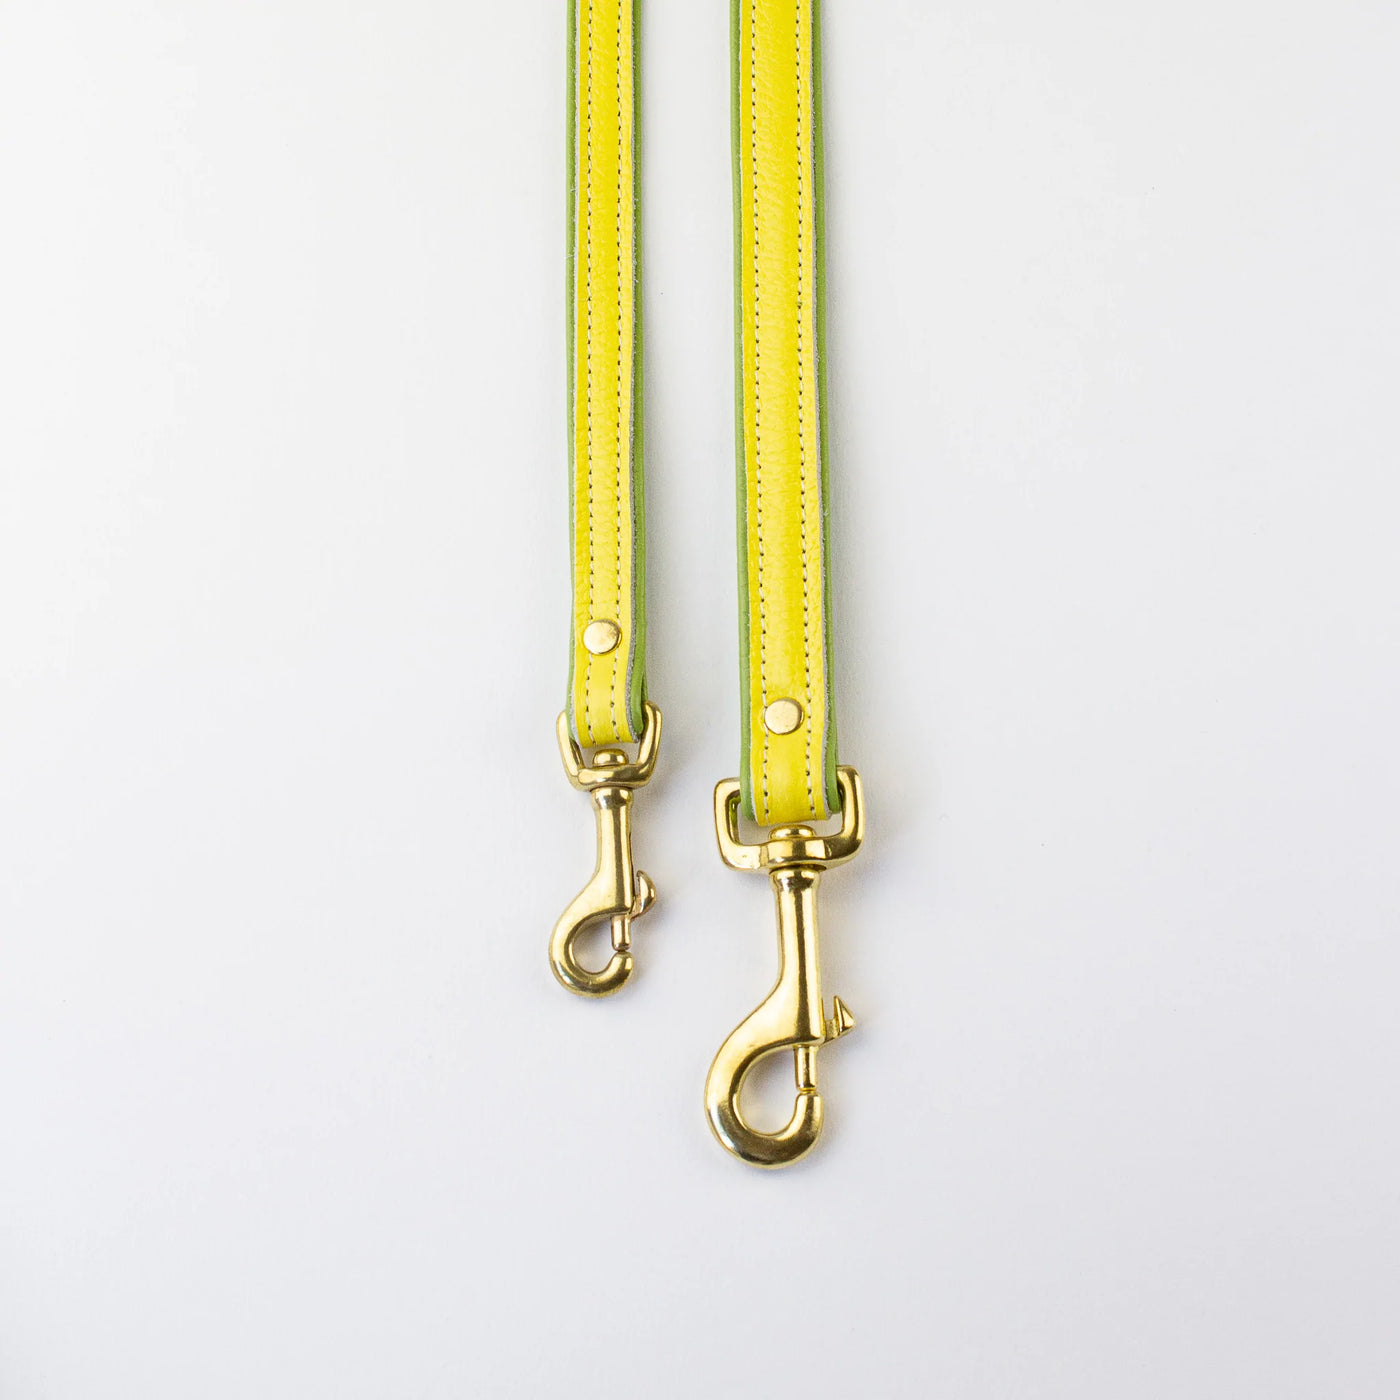 Two Tone Leather Lead In Light Green and Yellow